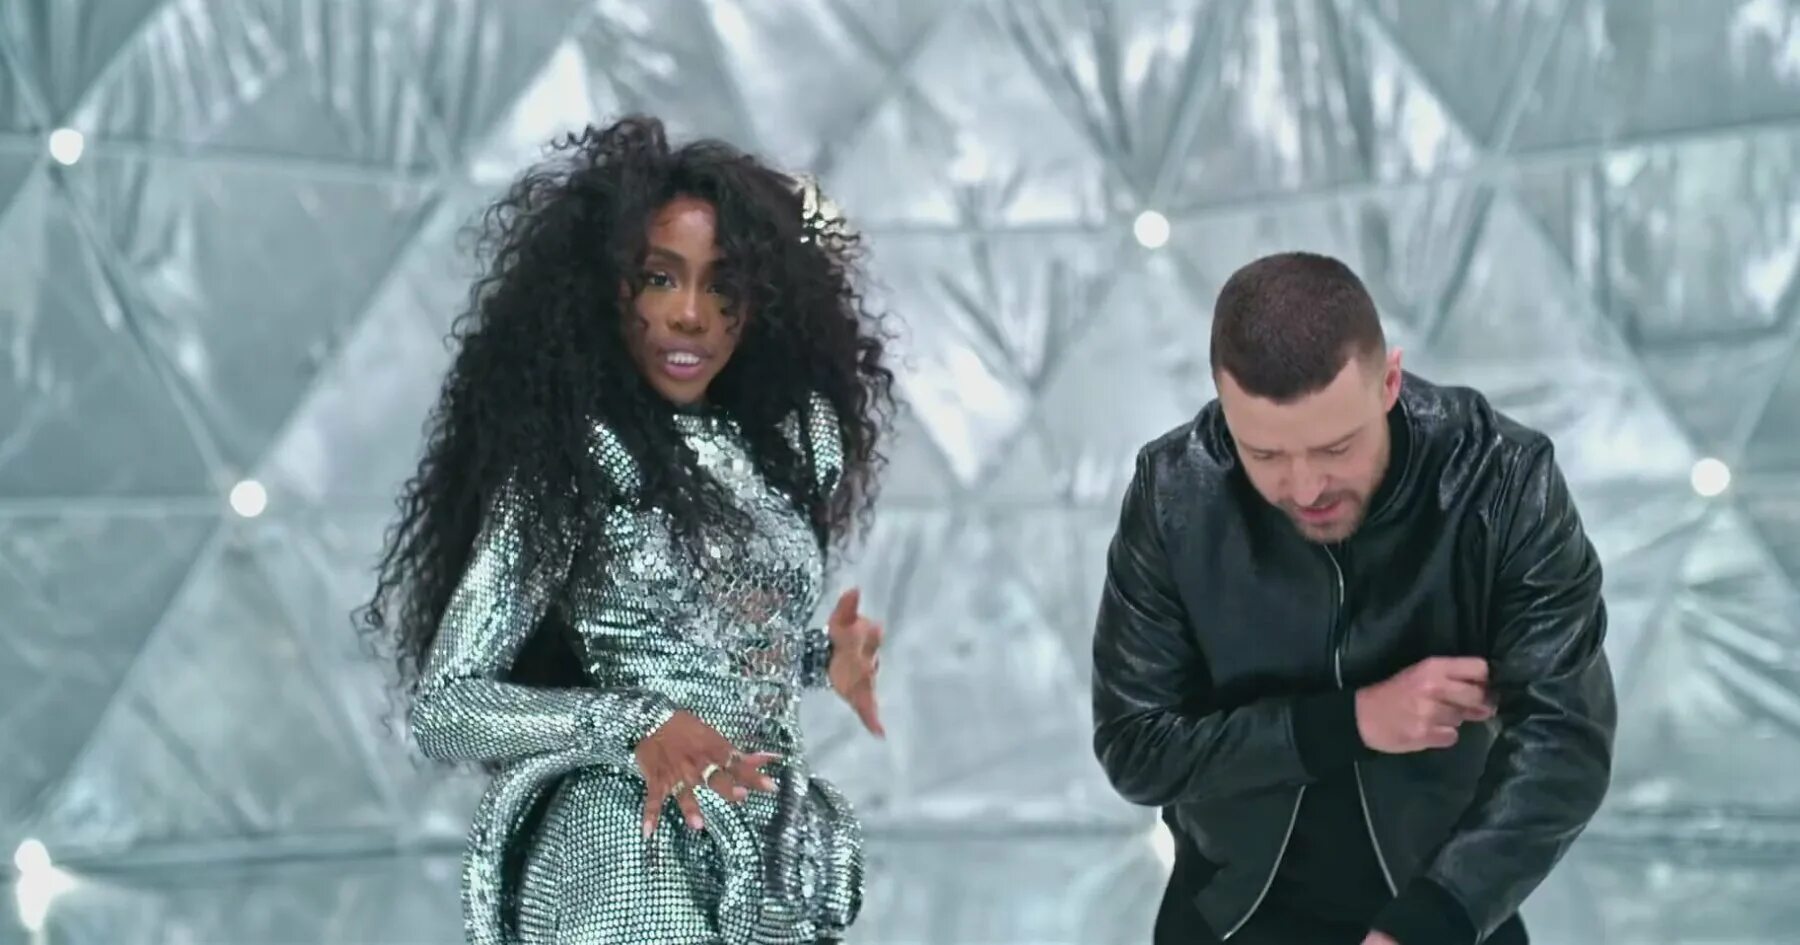 SZA, Justin Timberlake - the other Side (from trolls World Tour). SZA and Justin Timberlake the other Side Oliver Heldens Remix. Timberlake песня. Justin Timberlake и девушка песня.